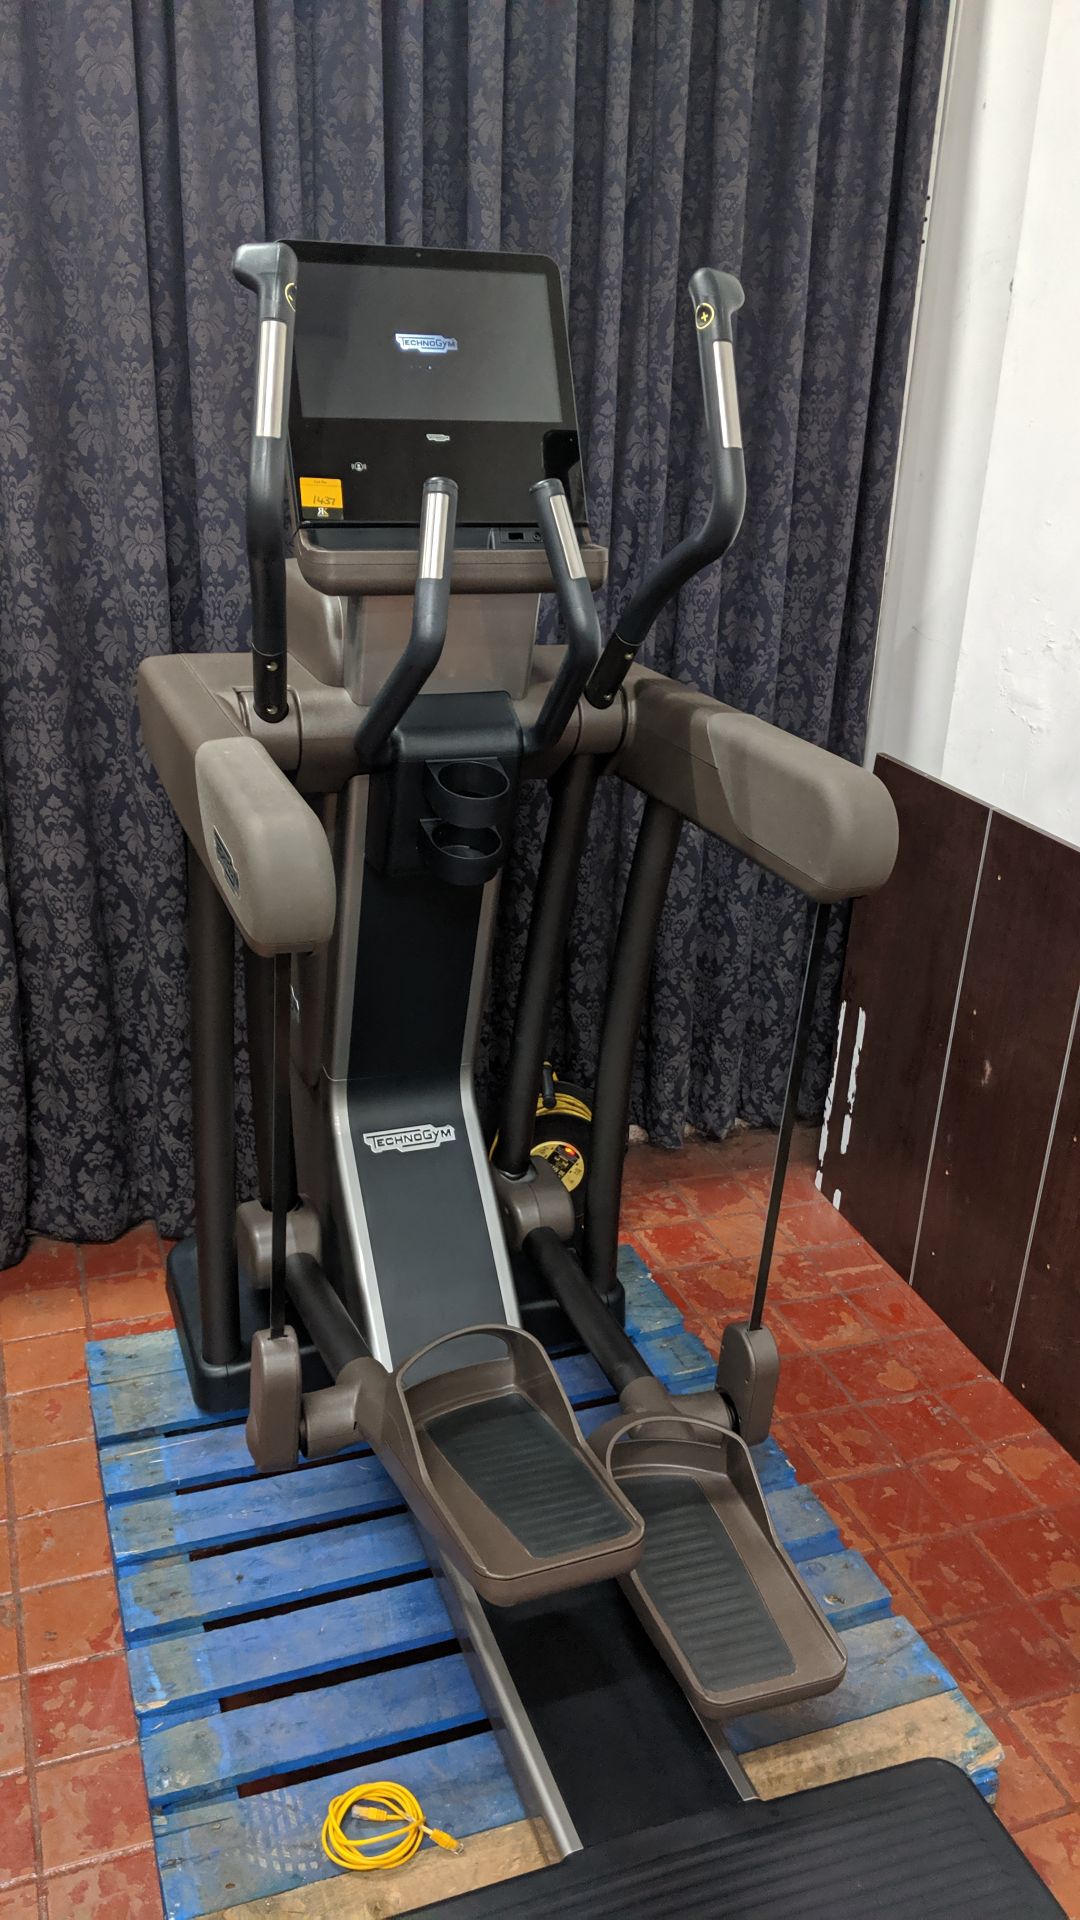 Technogym Vario Artis elliptical cross trainer Purchased new in 2016 - refurbished/recommissioned - Image 17 of 18